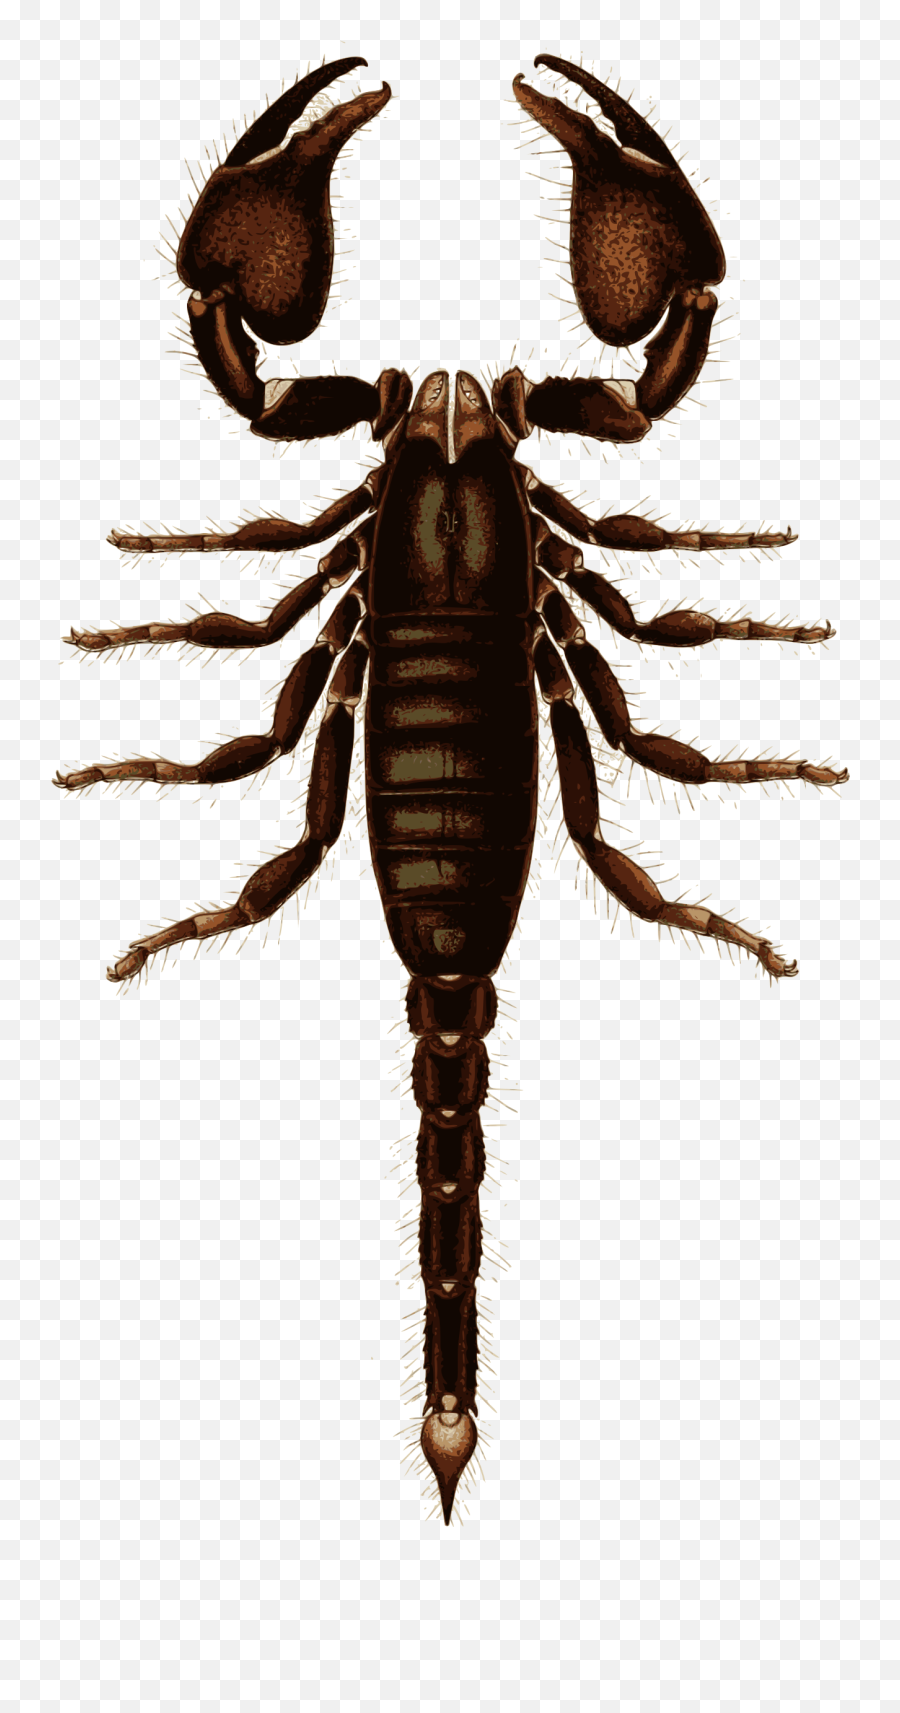 Download Big Image - Scorpion Png Image With No Background Transparent Scorpion Png,Scorpion Png